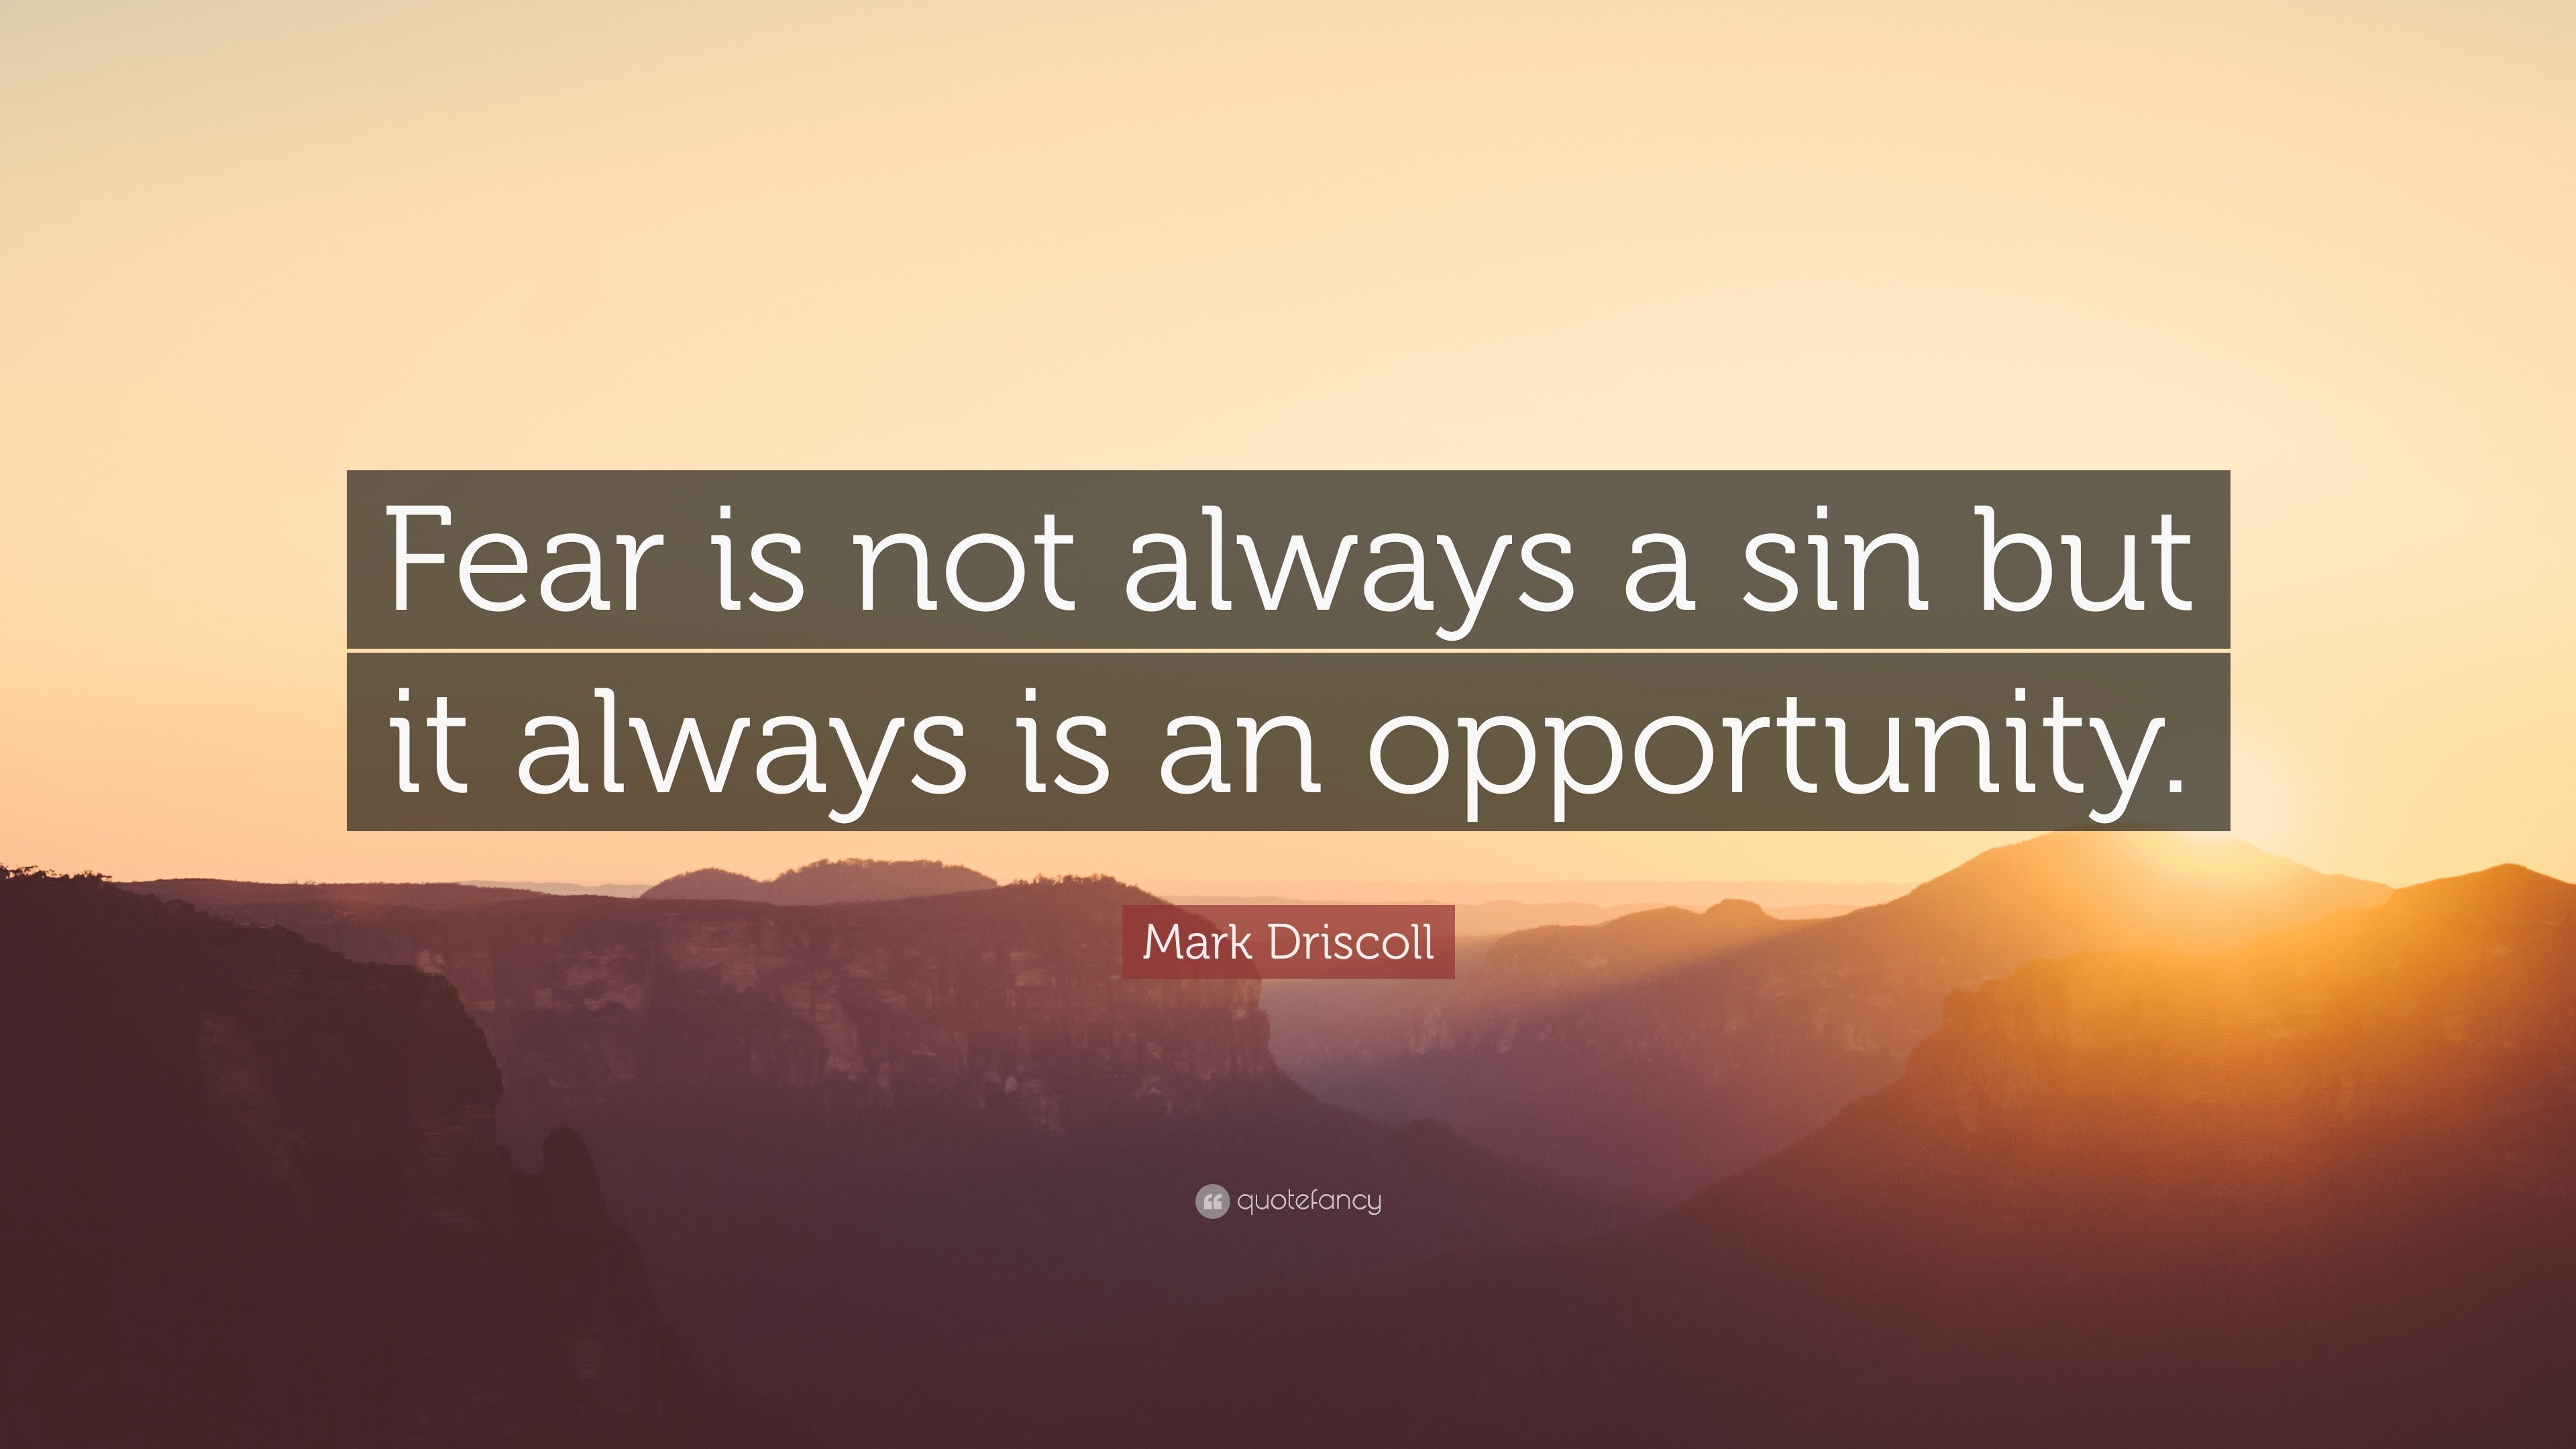 Mark Driscoll Quote: “Fear is not always a sin but it always is an ...